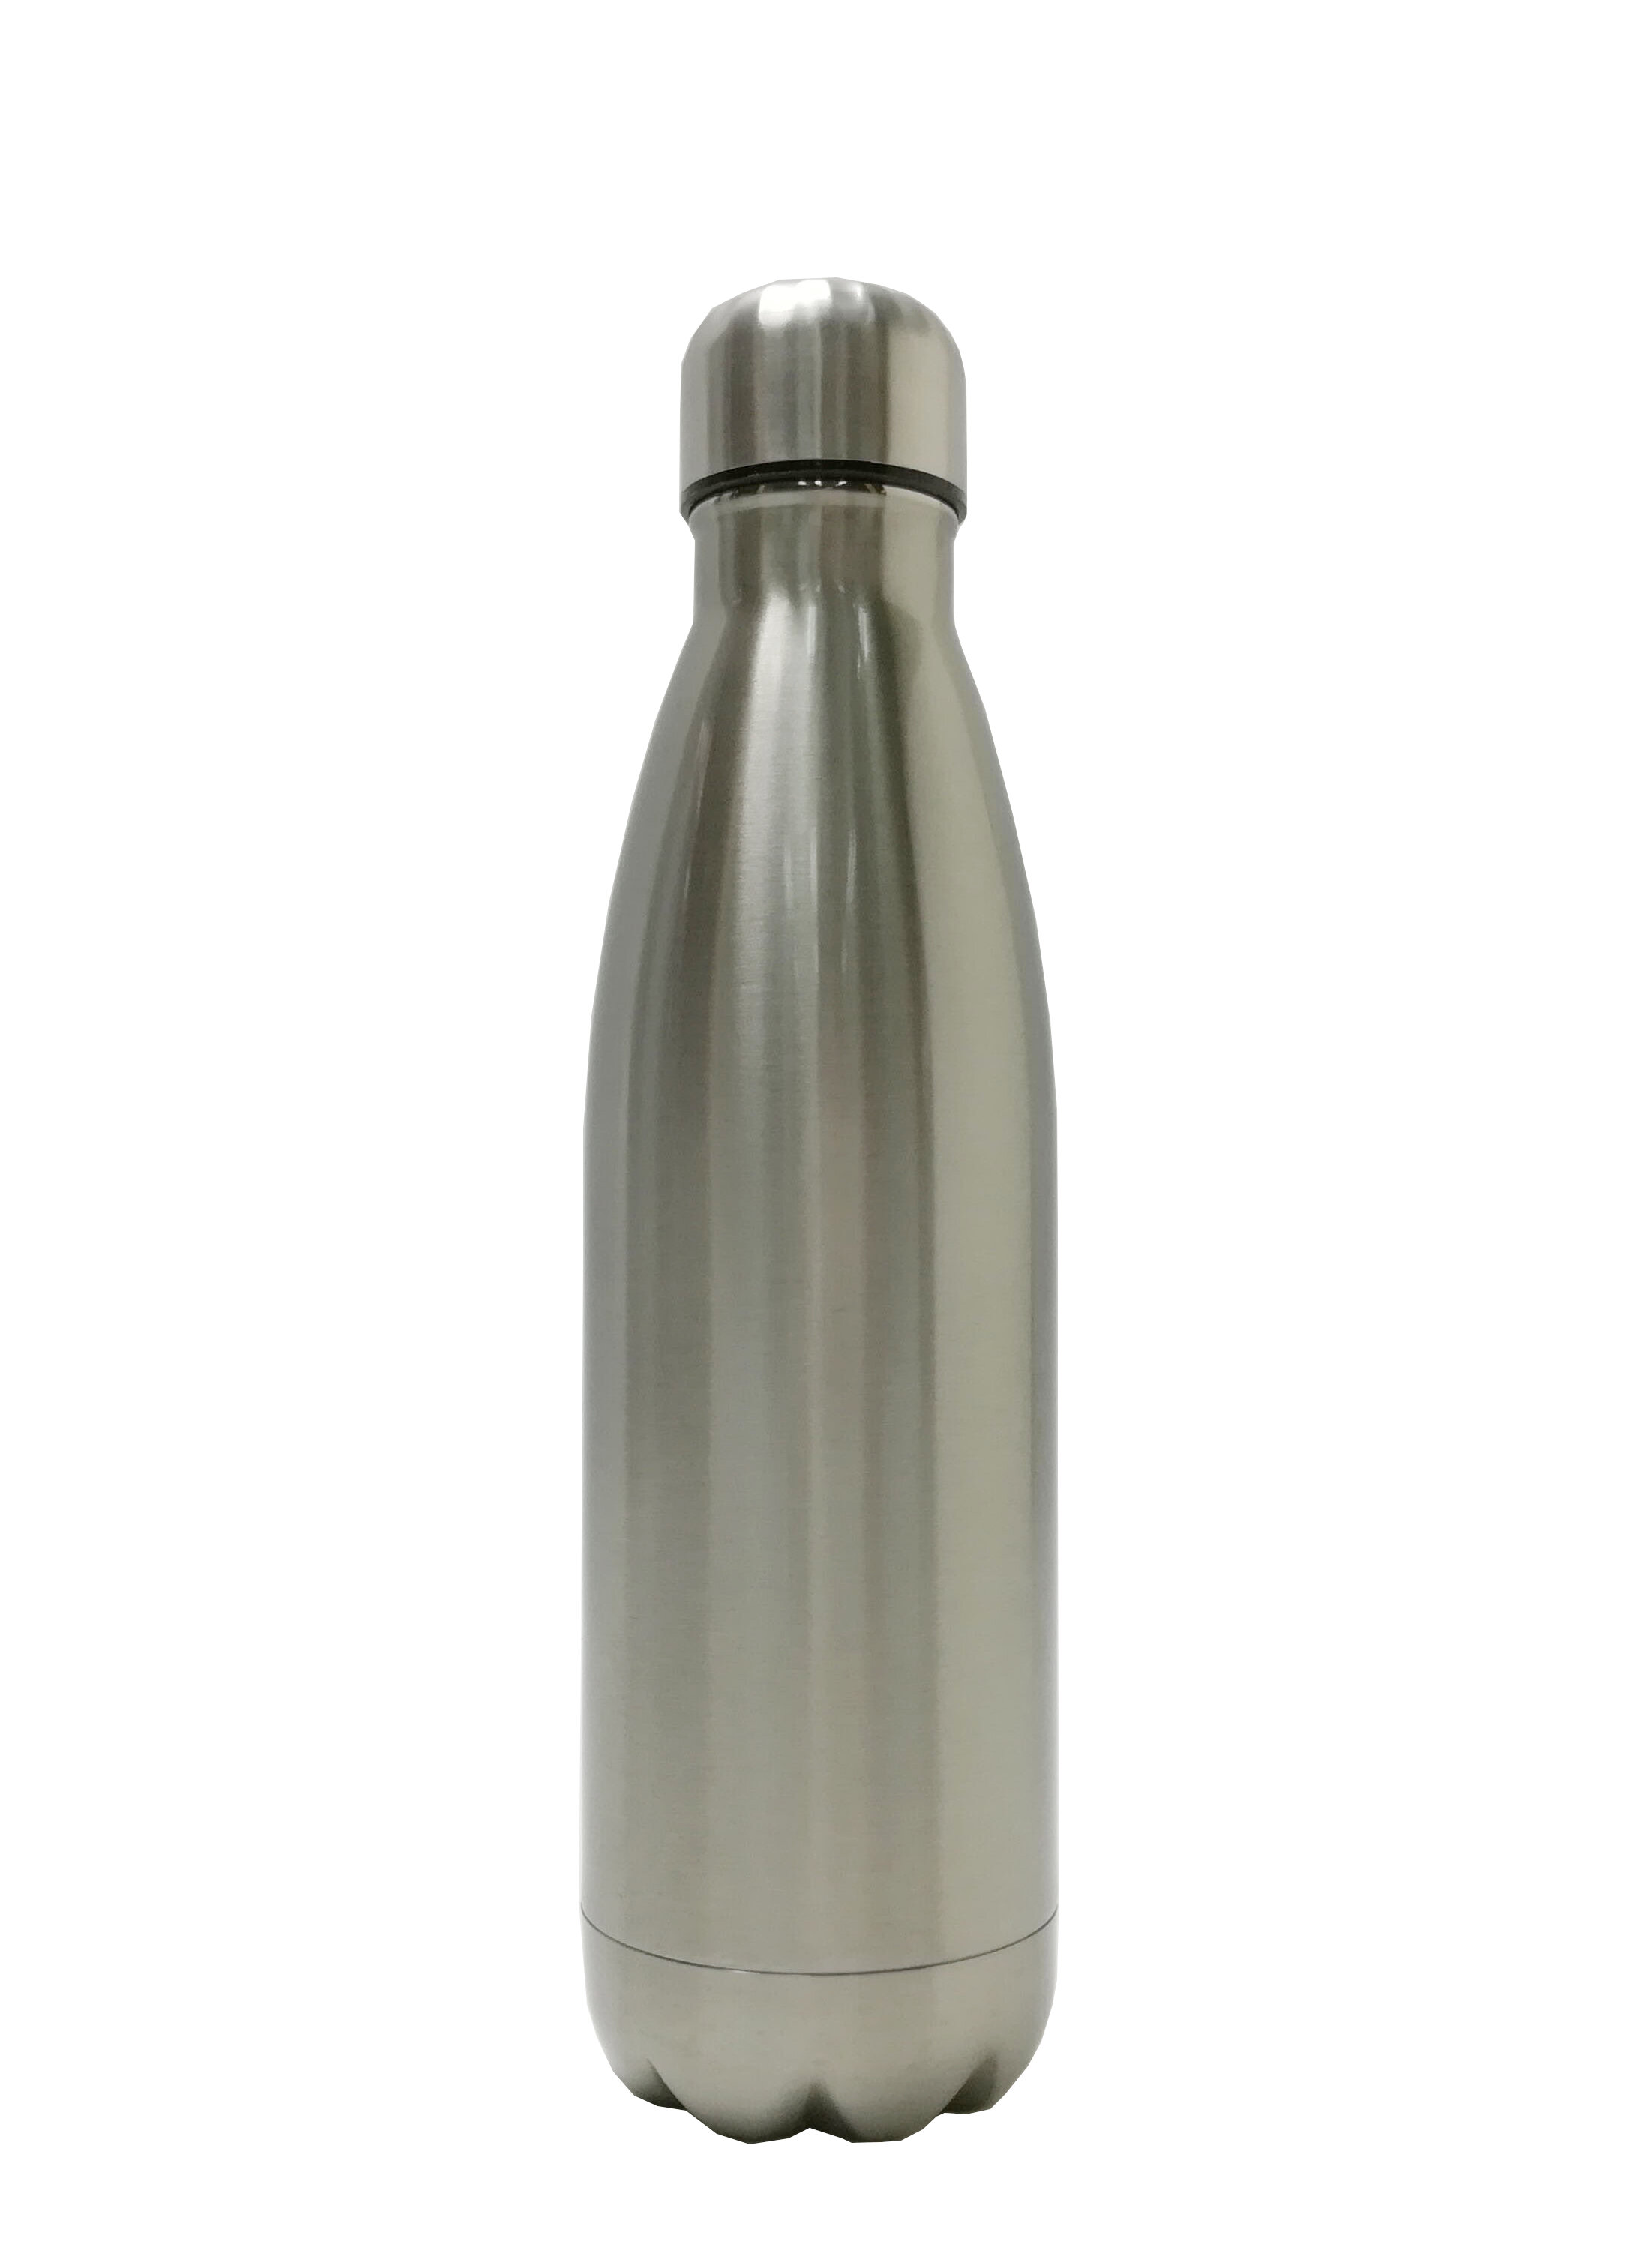 ThermoFlask 24 oz Insulated Stainless Steel Straw Tumbler, Peaceful